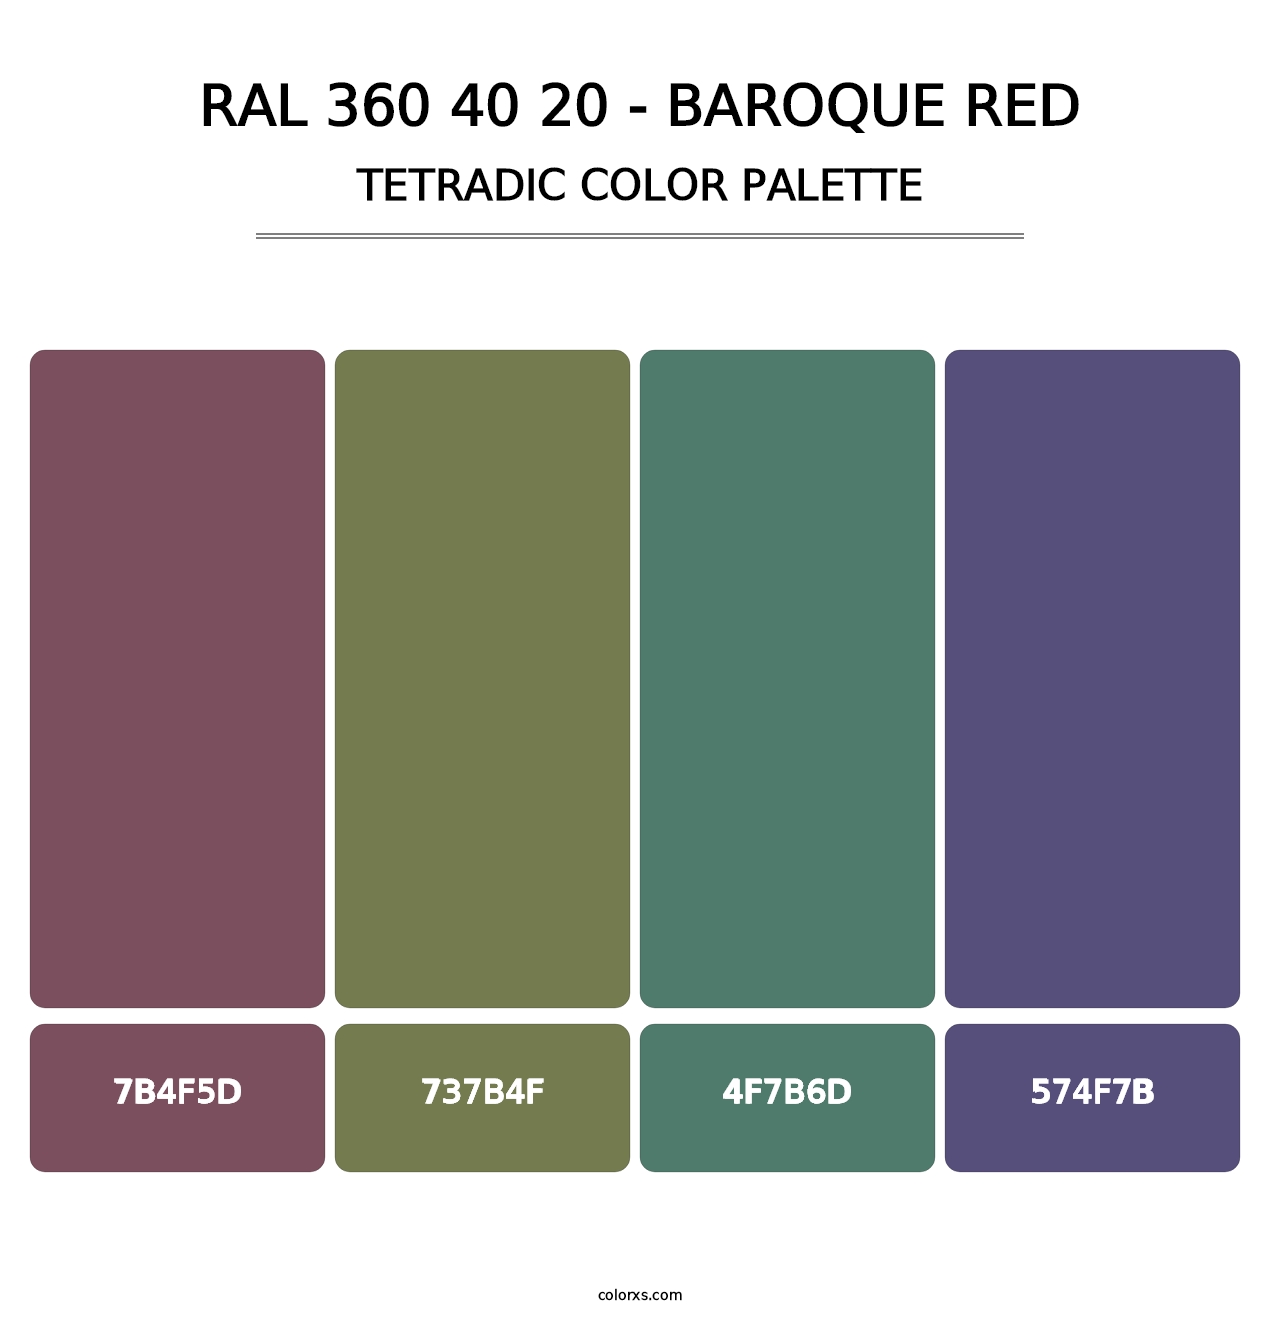 RAL 360 40 20 - Baroque Red - Tetradic Color Palette